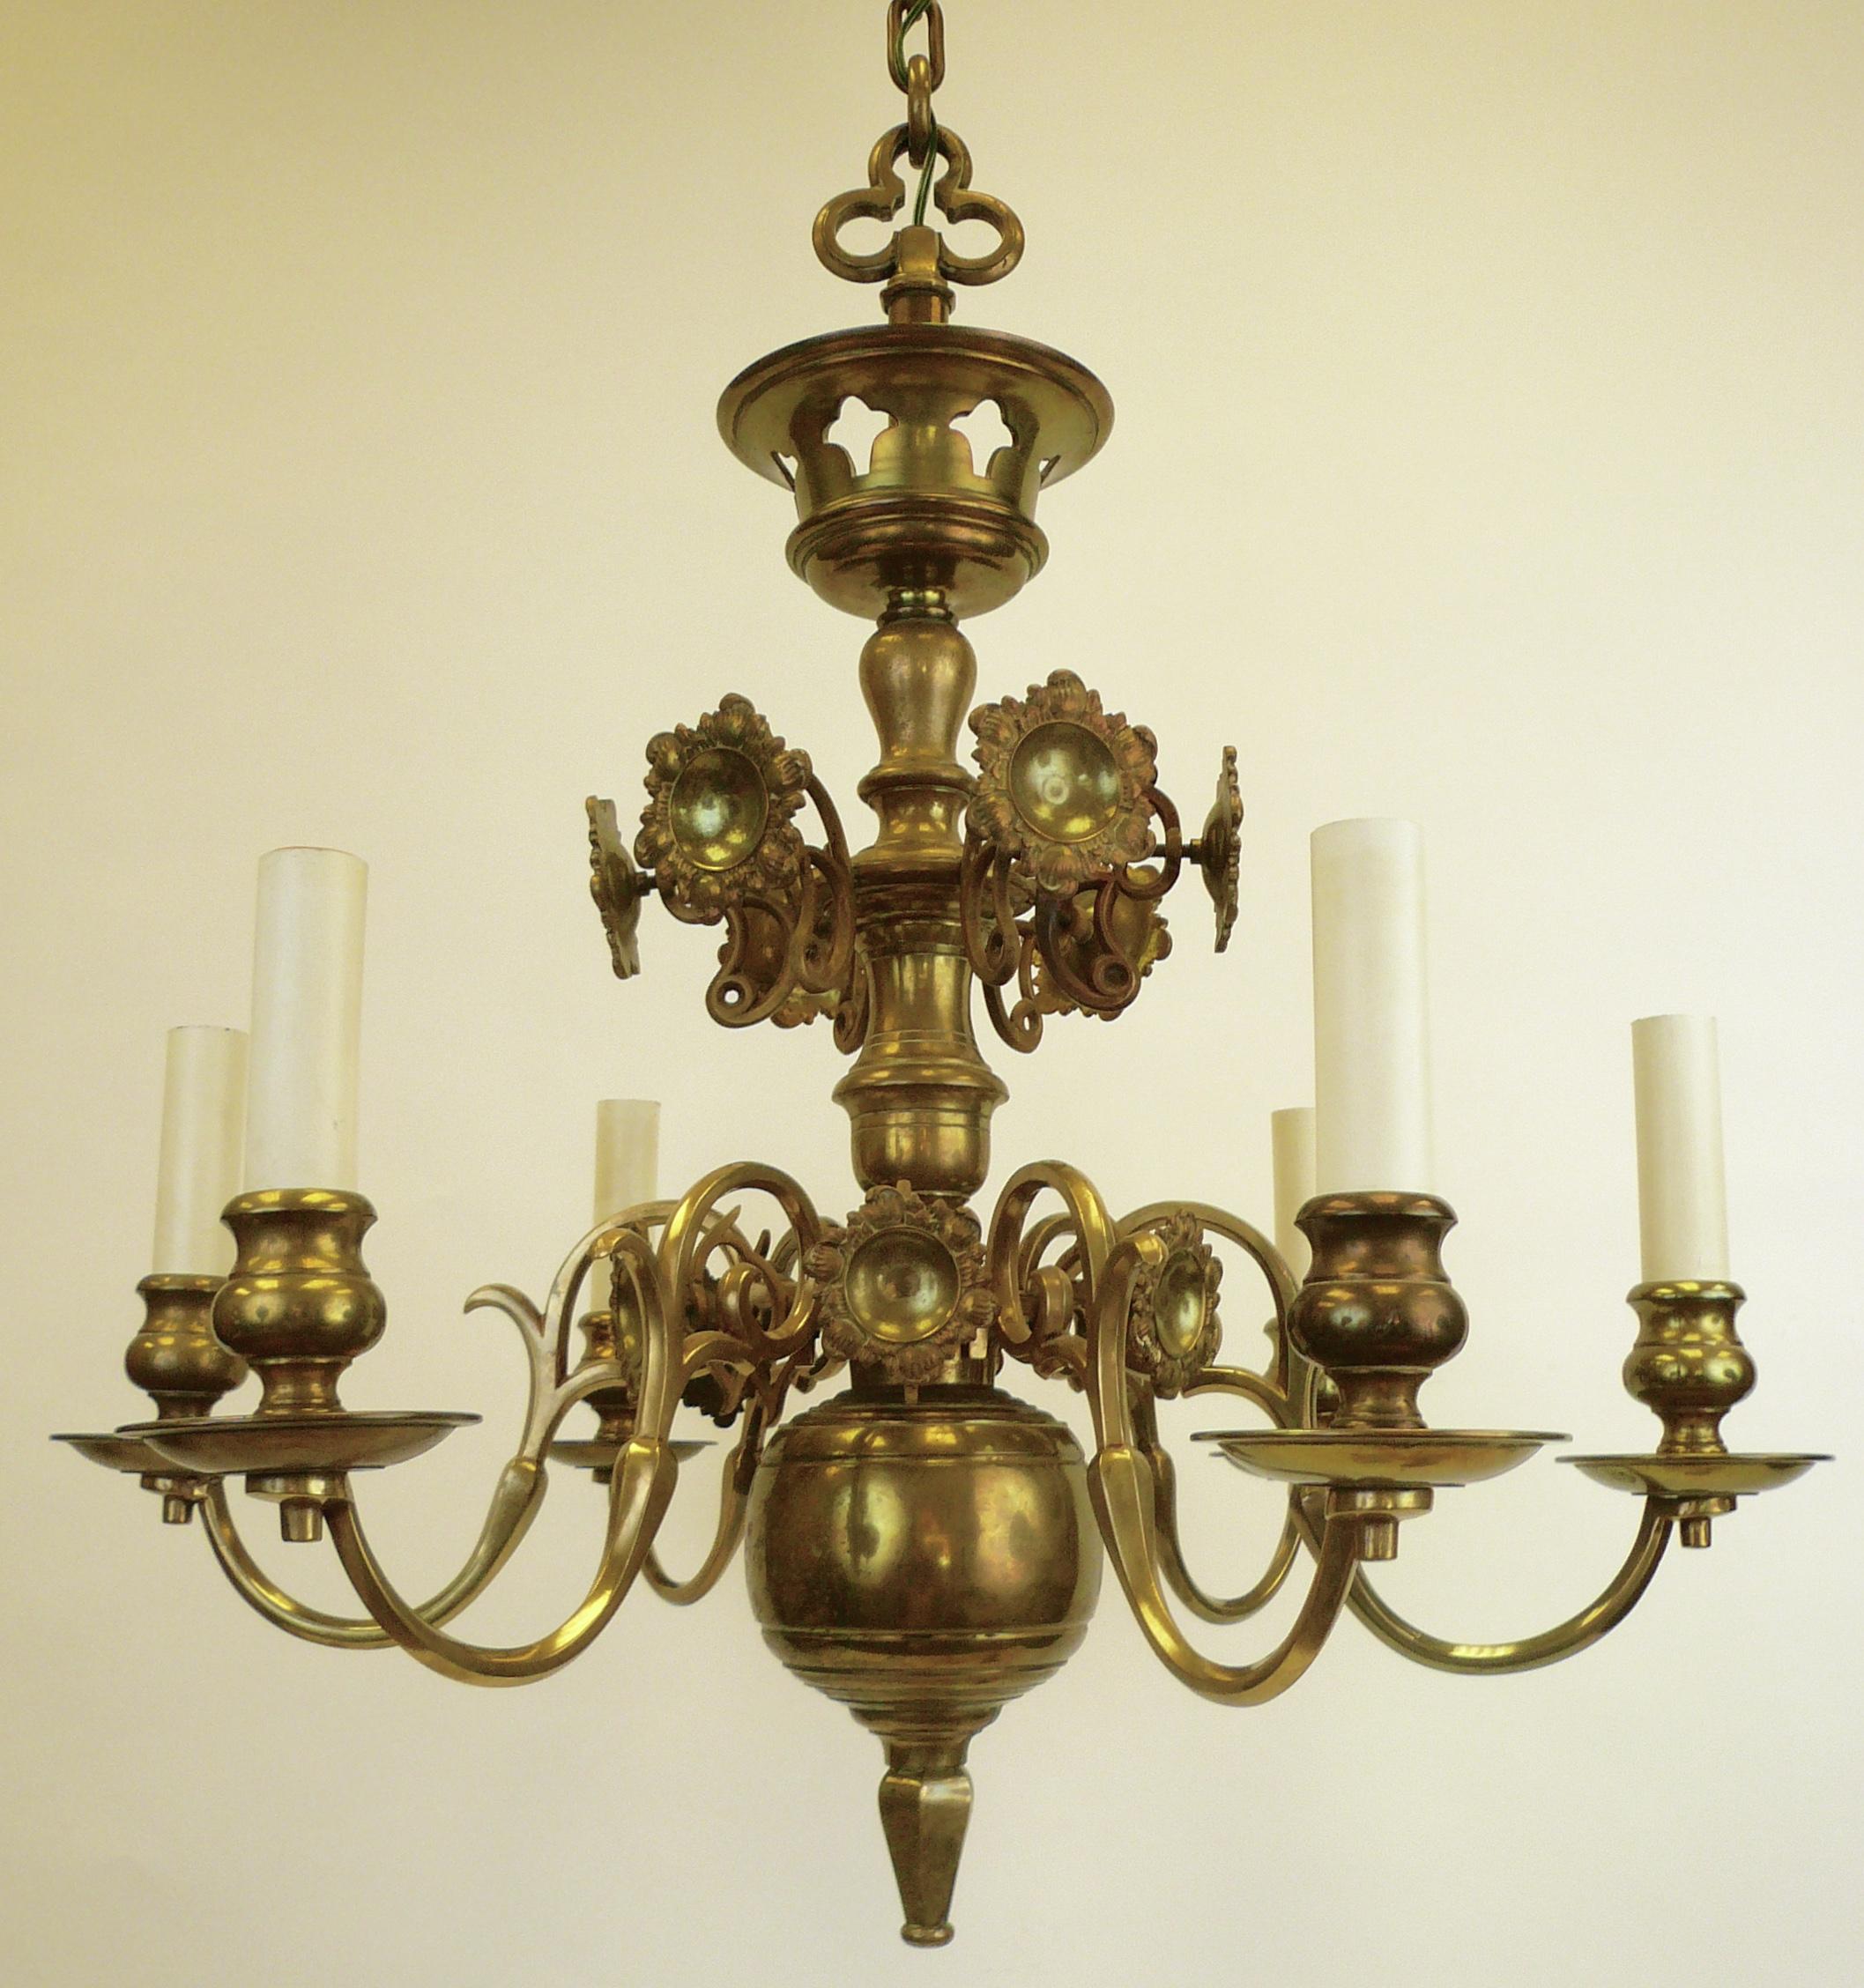 This handmade pair of 17th century Dutch style chandeliers feature scrolled arms and floral form reflectors. These chandeliers were originally retailed by Edward F. Caldwell & Company
There are four matching three arm sconces also available.